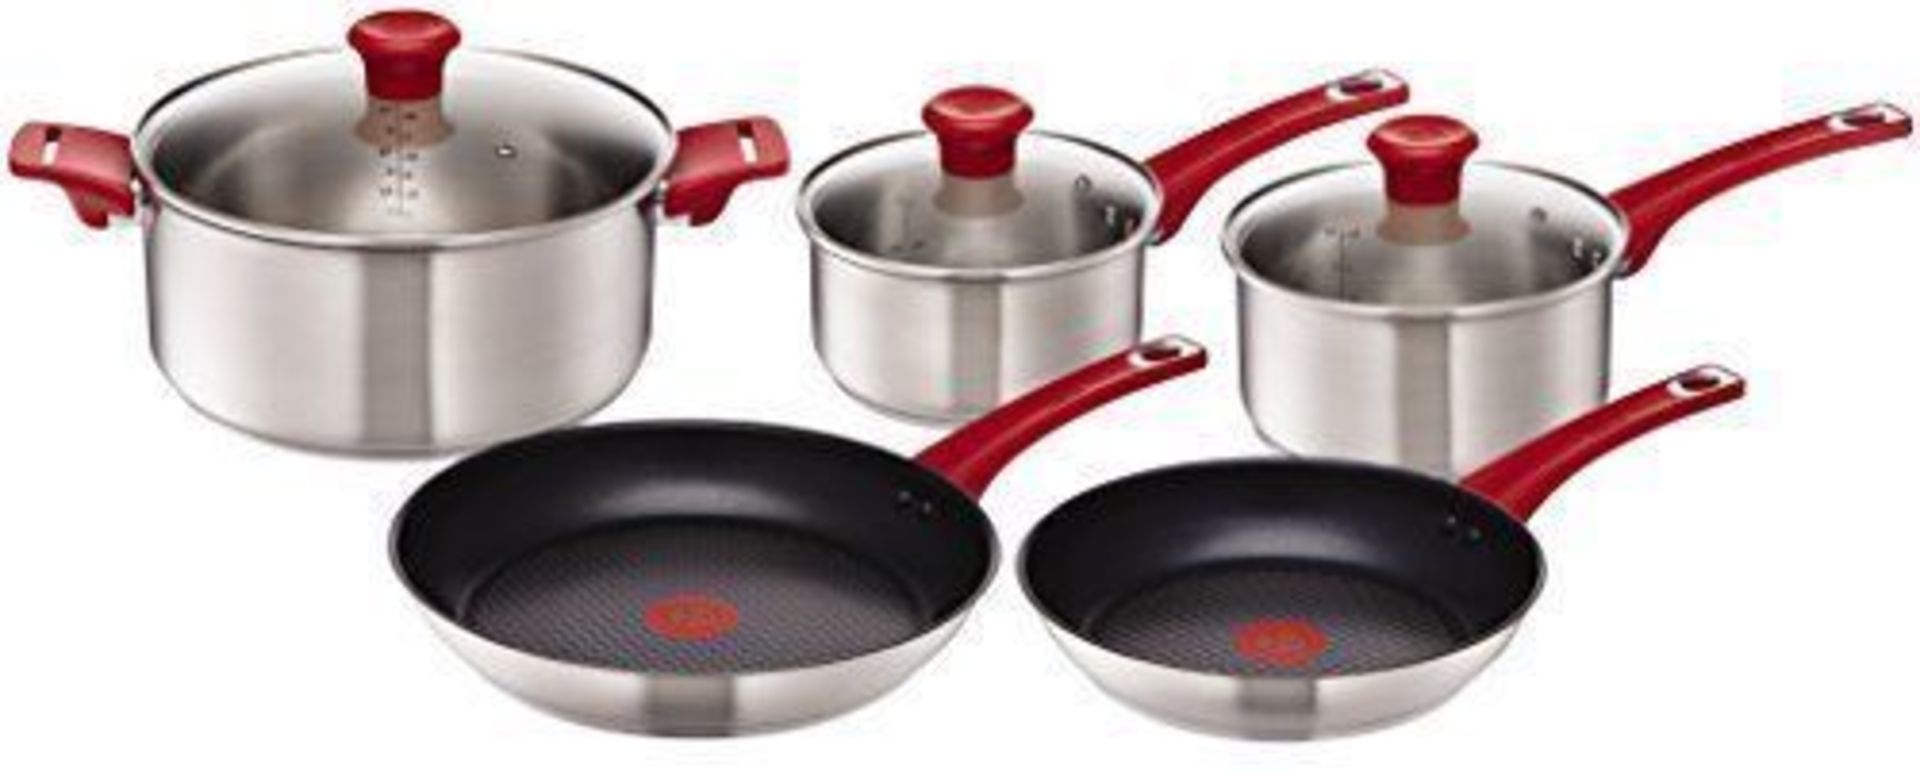 V Brand New Tefal Jamie Oliver 5 Piece Stainless Steel Set - £149.99 at Currys - Contains 2 x Frying